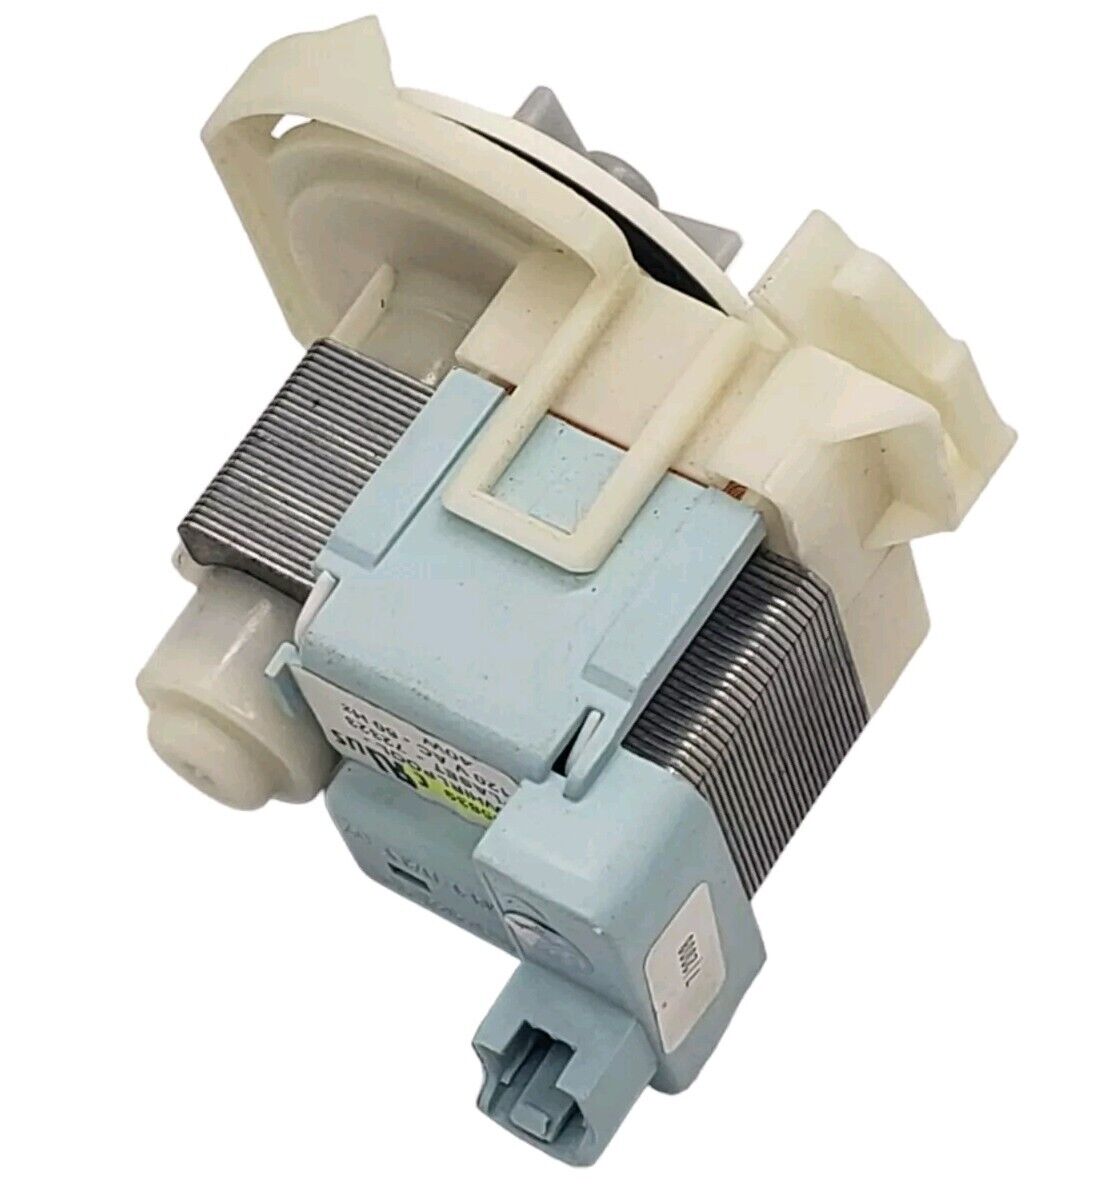 Replacement for Kenmore Dishwasher Drain Pump 8565839